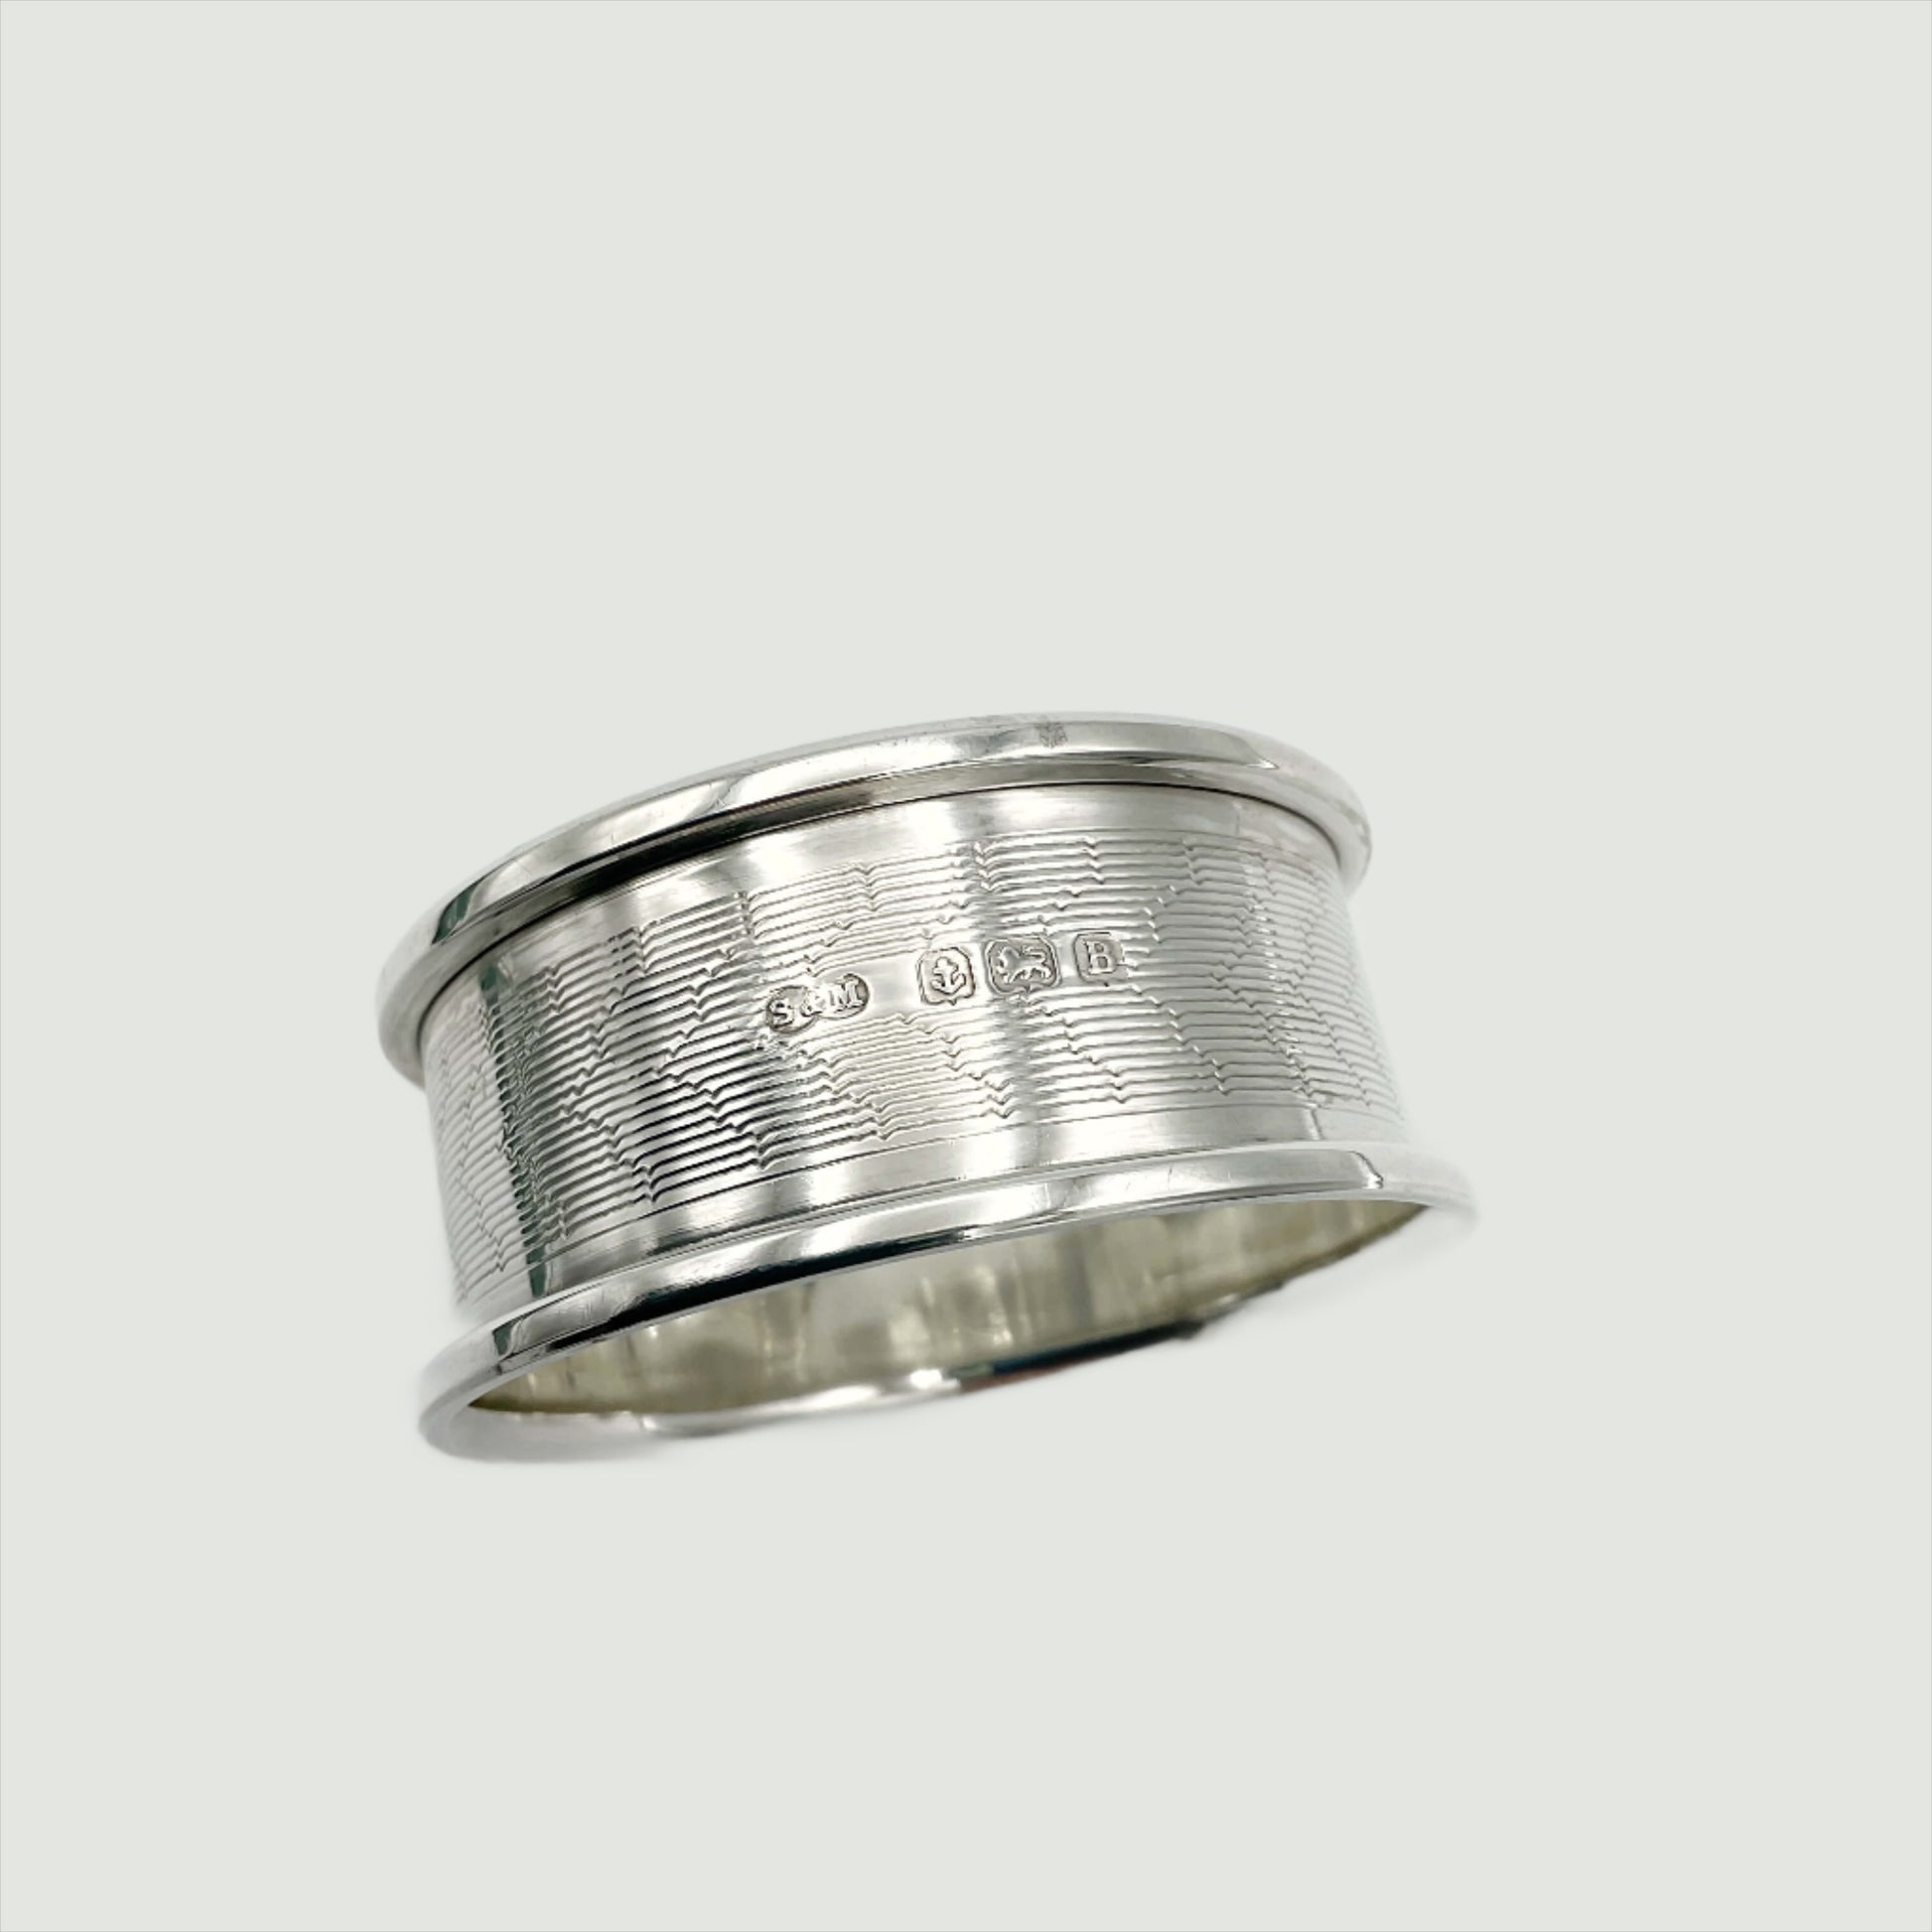 Silver napkin ring with hallmarks and maker’s marks